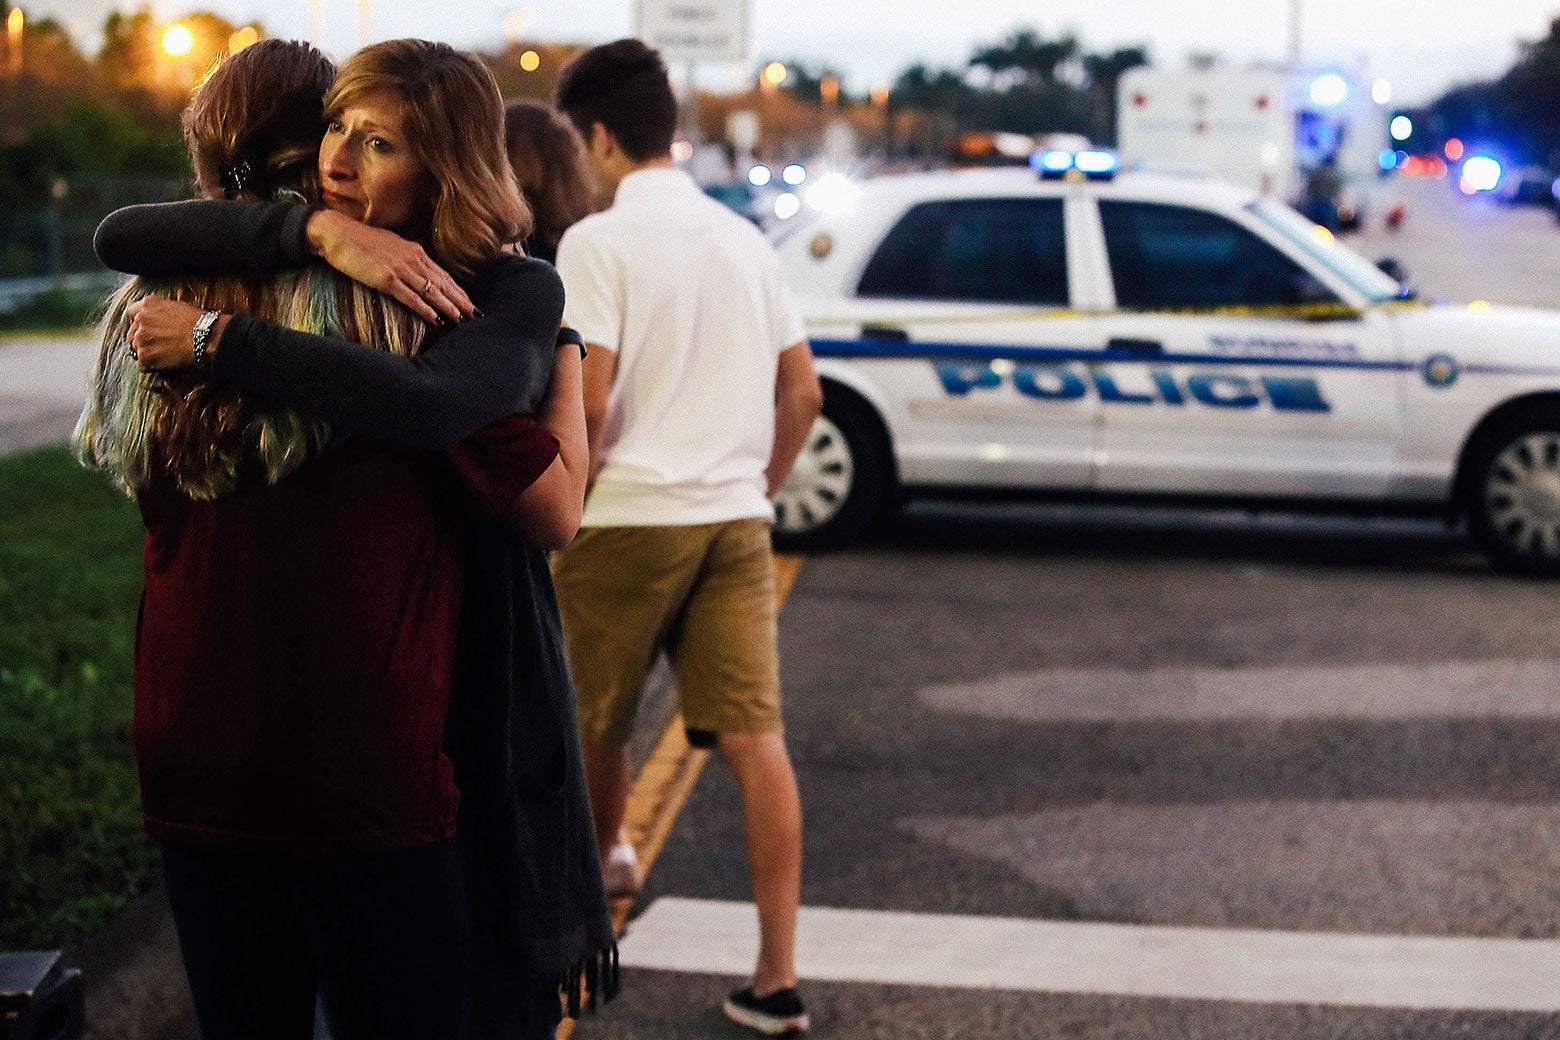 Kristi Gilroy hugs a young woman at a police checkpoint near Marjory Stoneman Douglas High School on Thursday in Parkland, Florida.